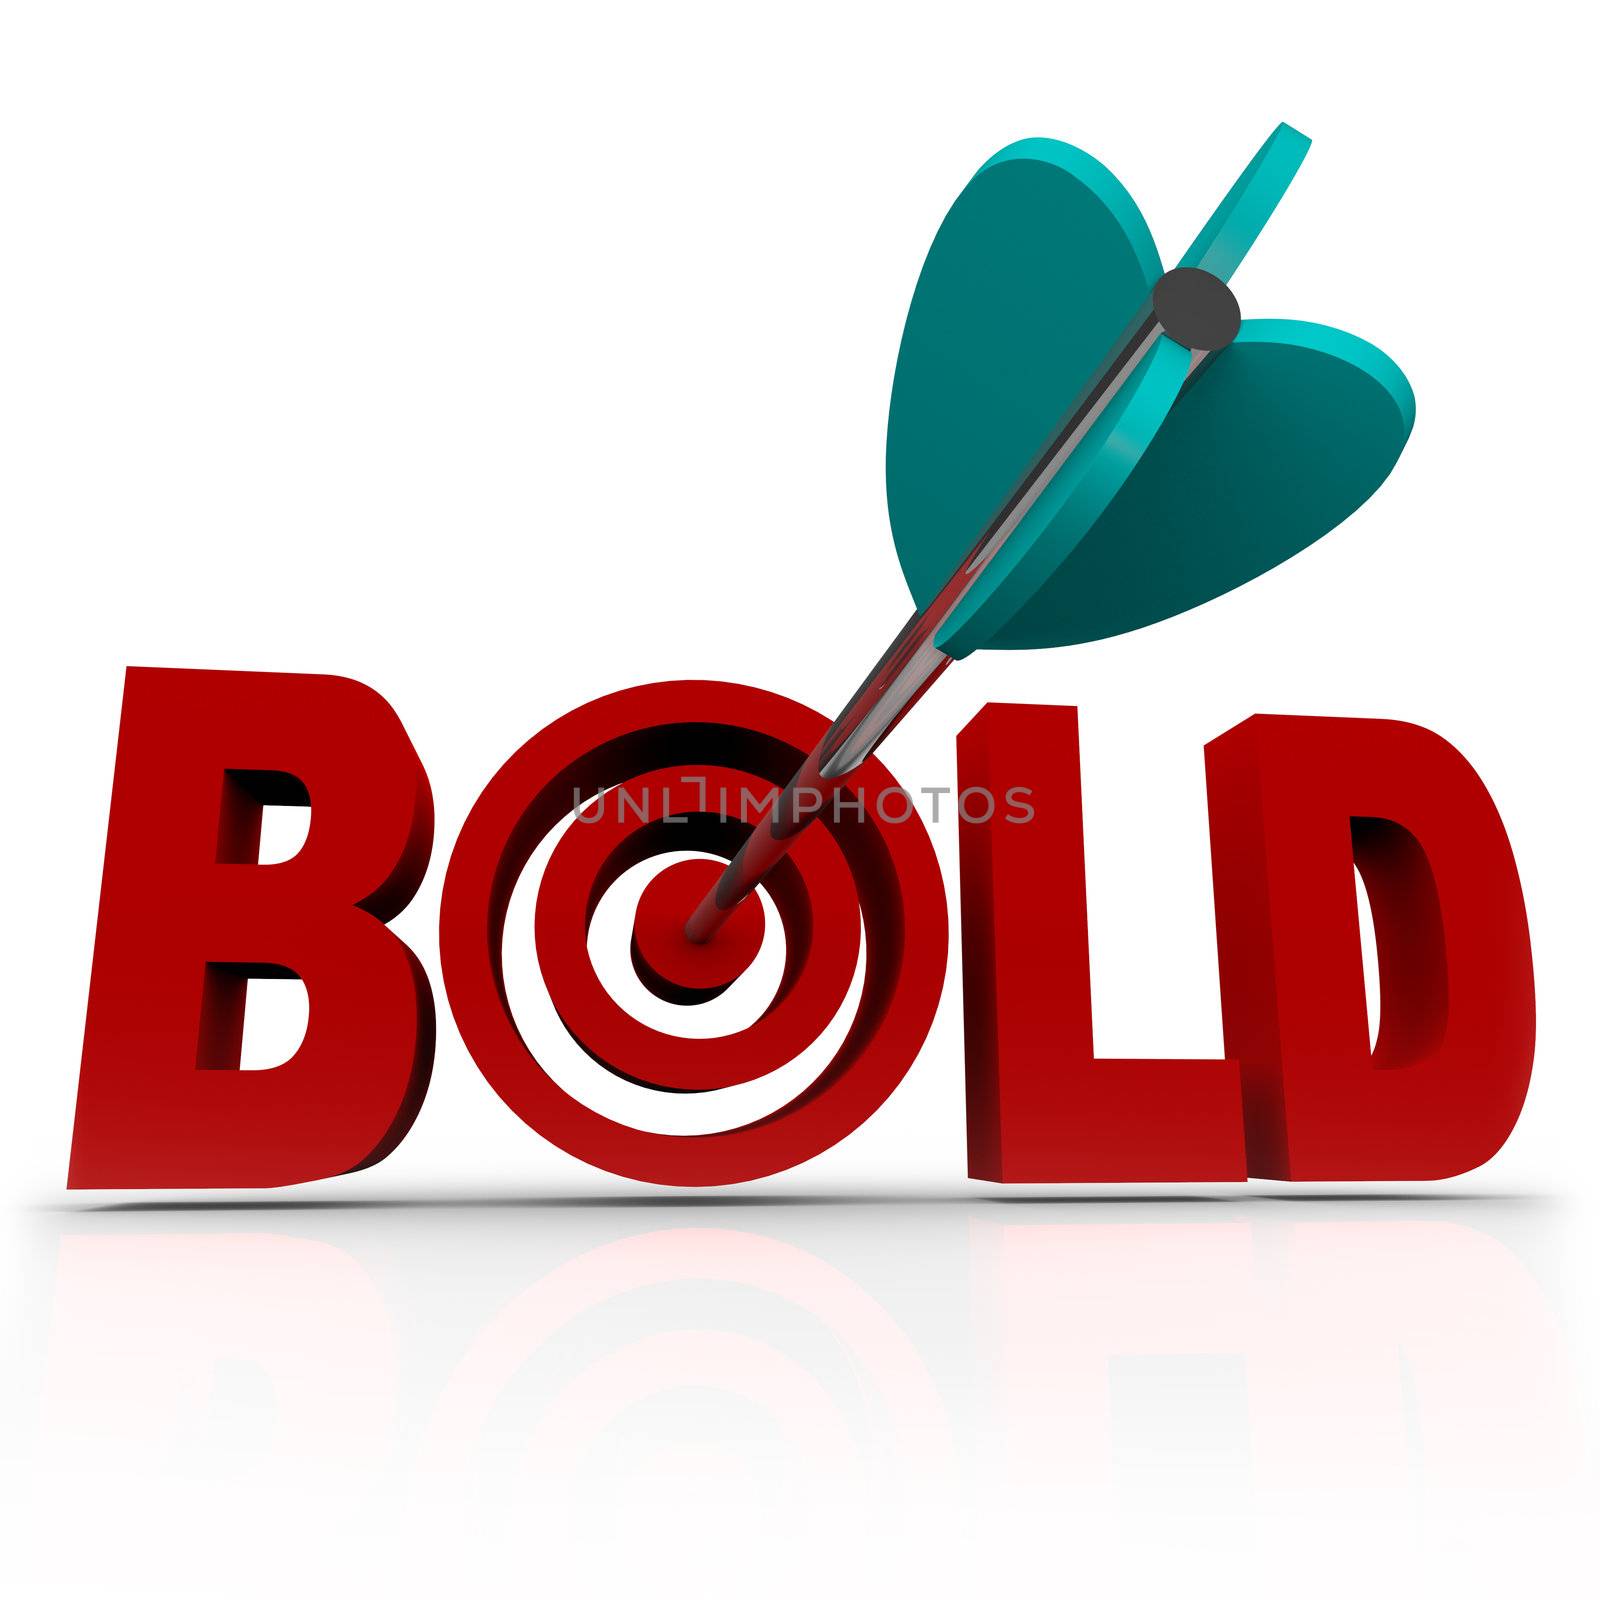 The word Bold with an arrow striking a bullseye target, symbolizing the need to be confident and aggressive in overcoming a challenge